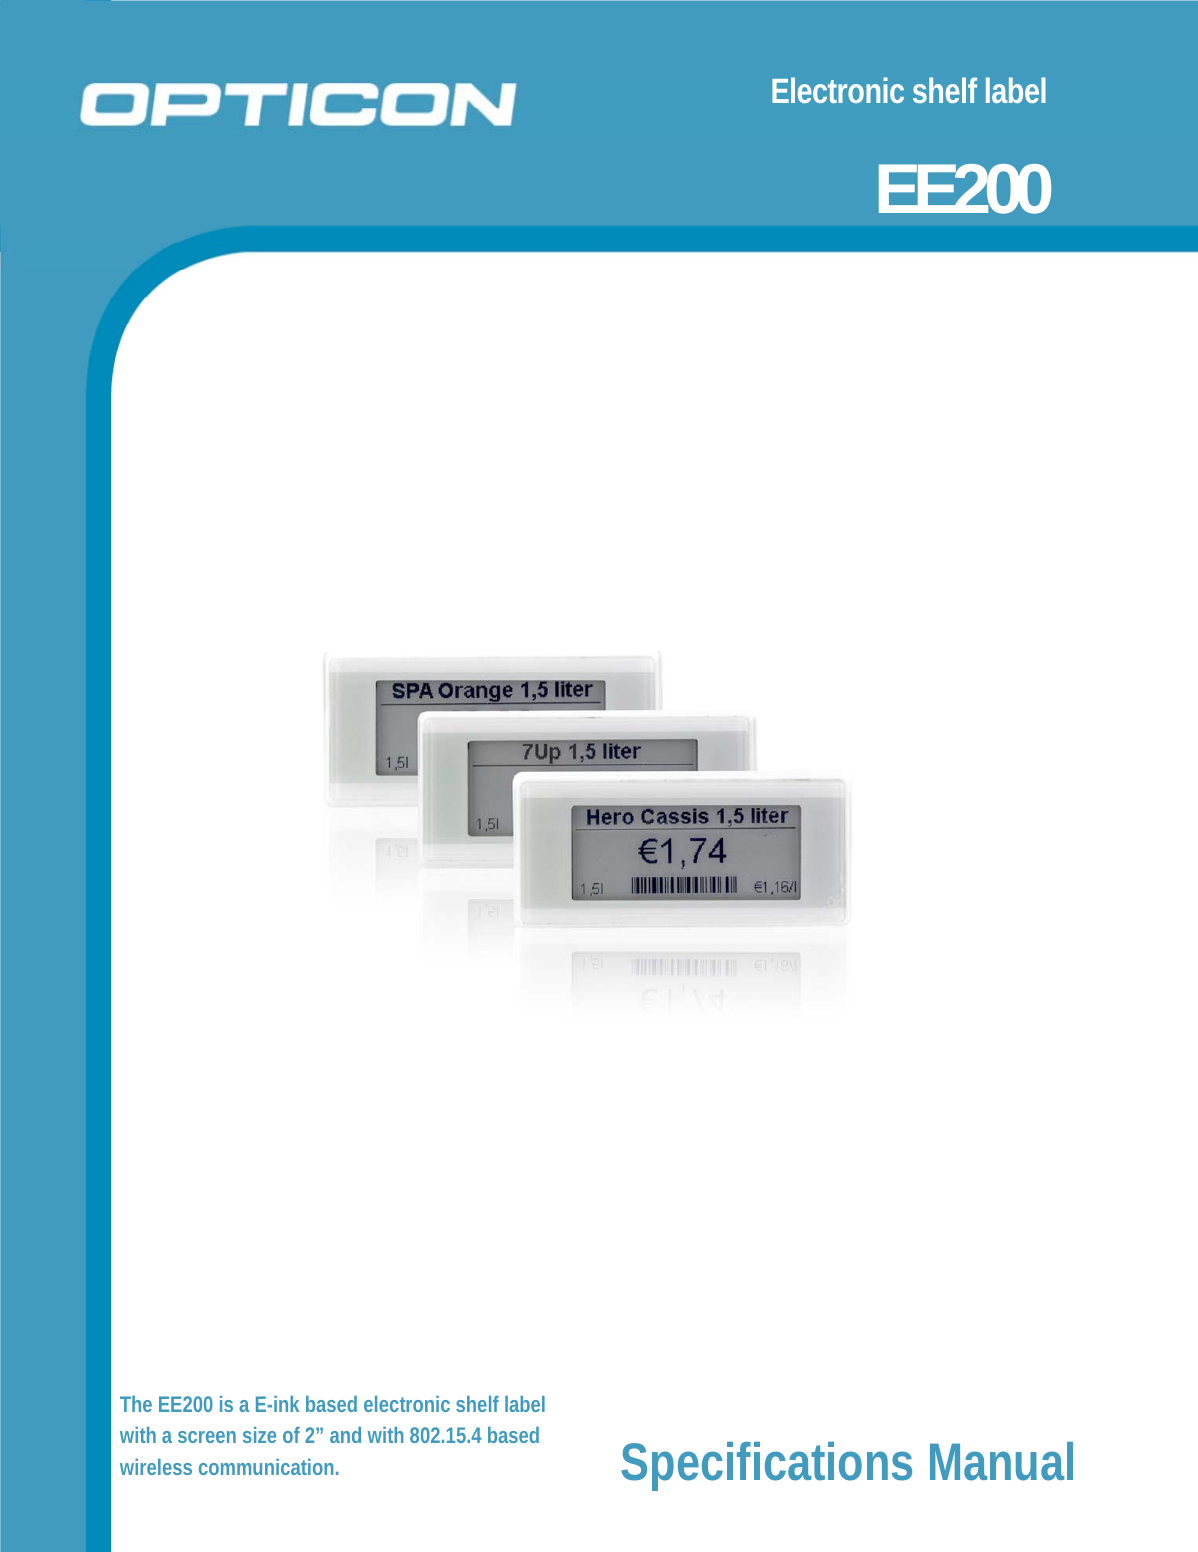 Electronic shelf label                        EE200                 The EE200 is a E-ink based electronic shelf label with a screen size of 2” and with 802.15.4 based wireless communication.  Specifications Manual   